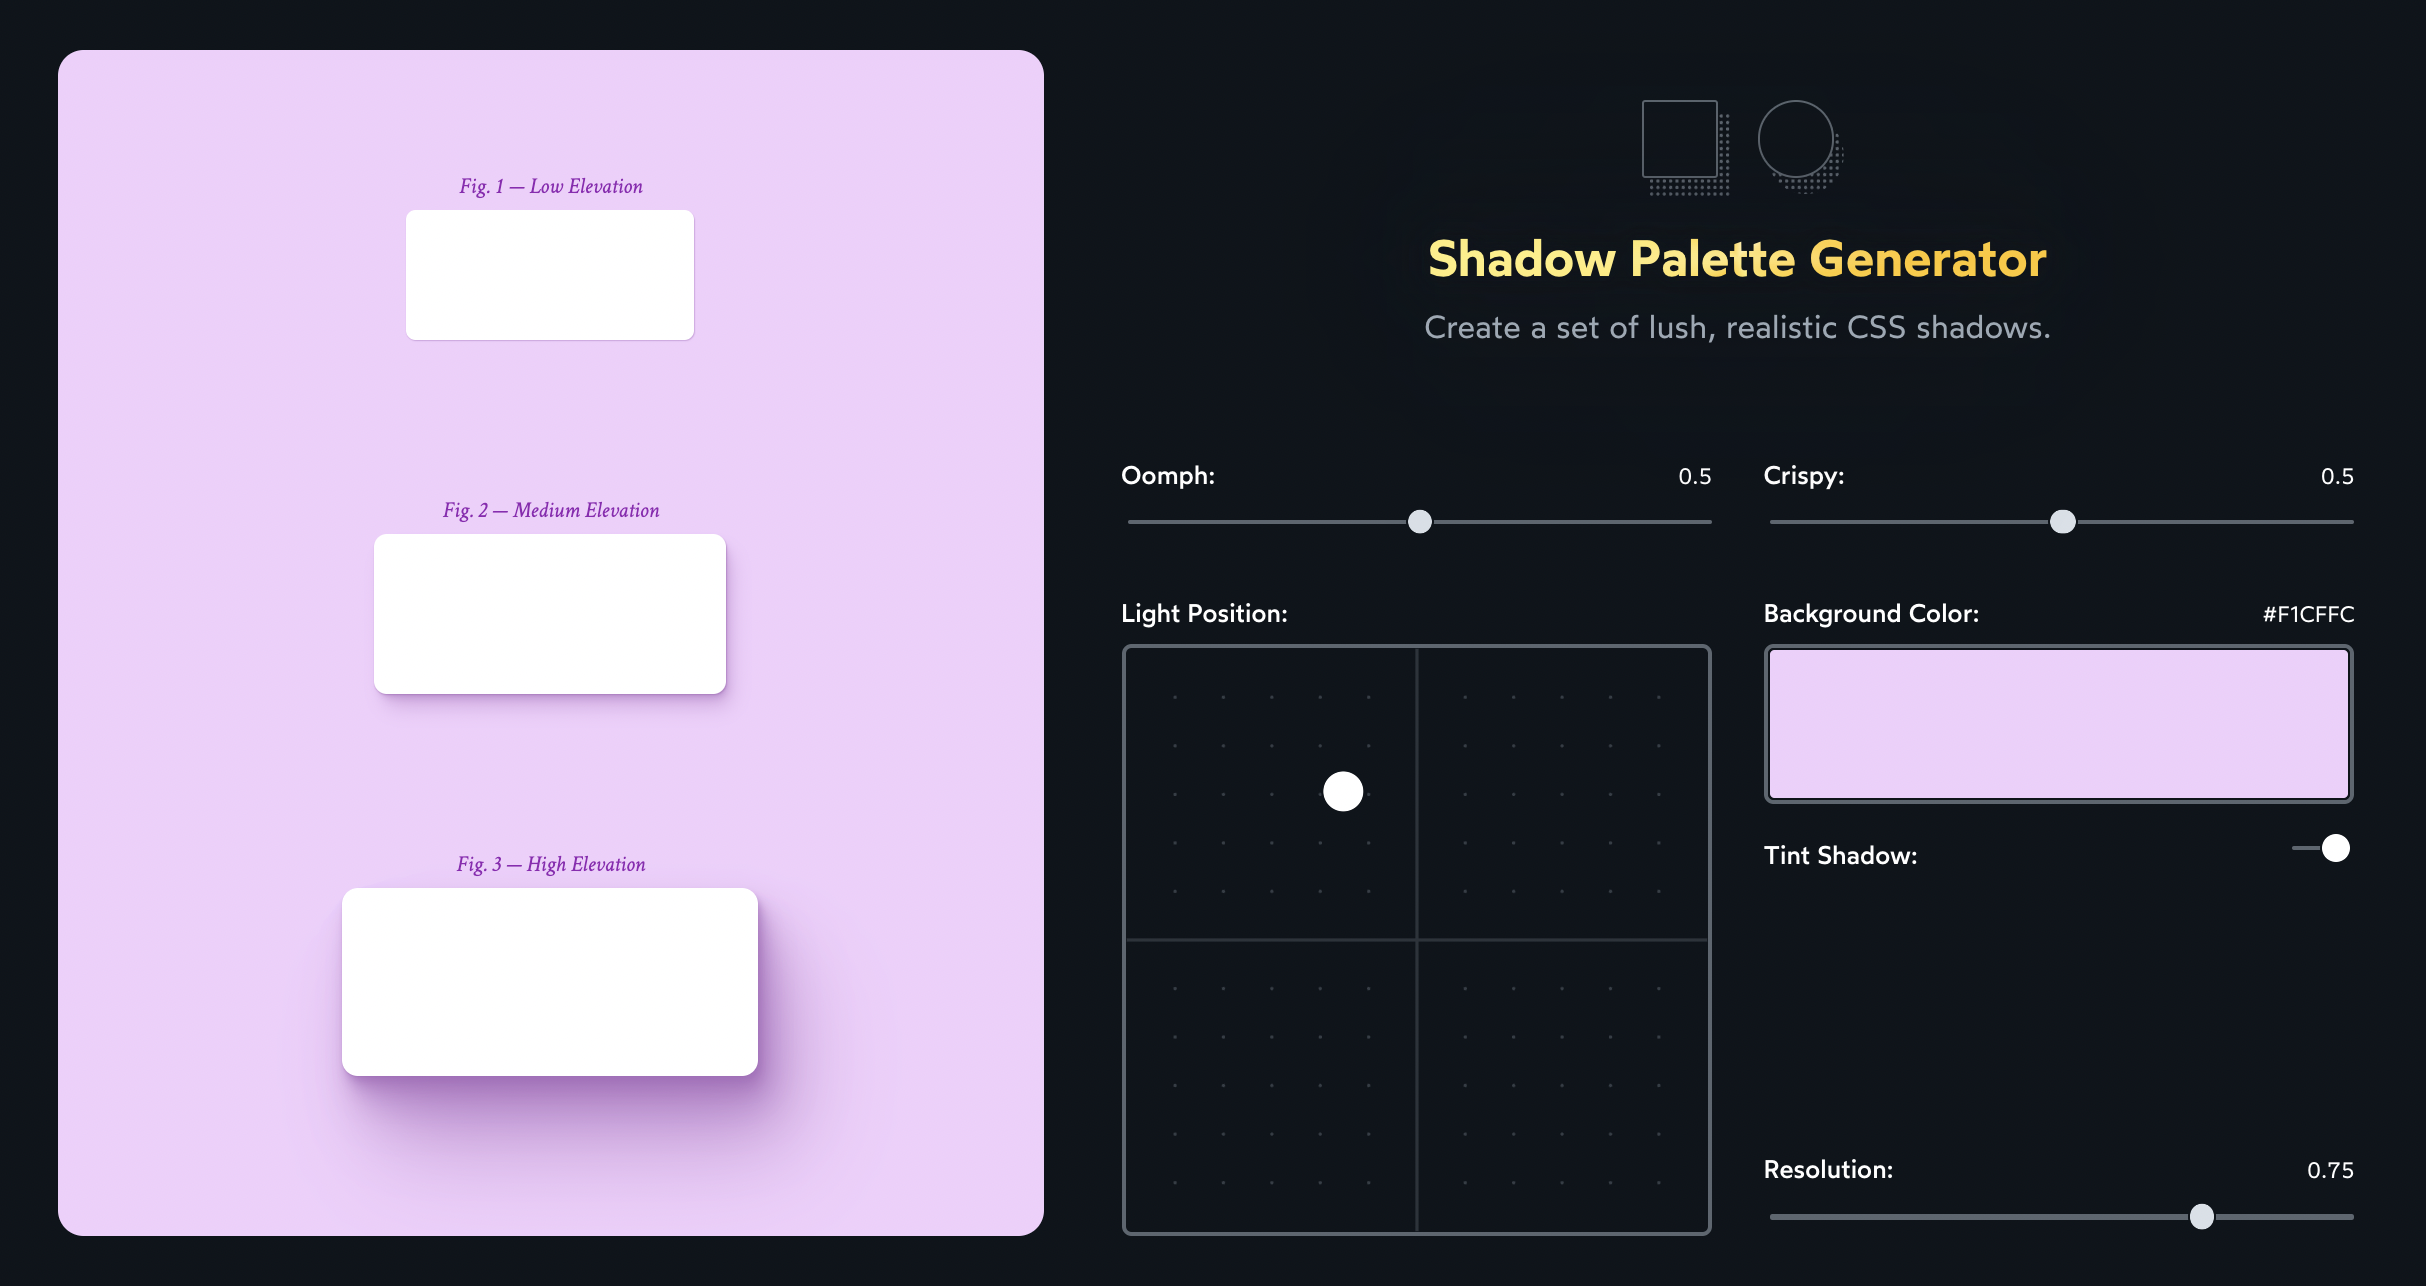 Introducing “Shadow Palette Generator”, a tool to help generate CSS box- shadow